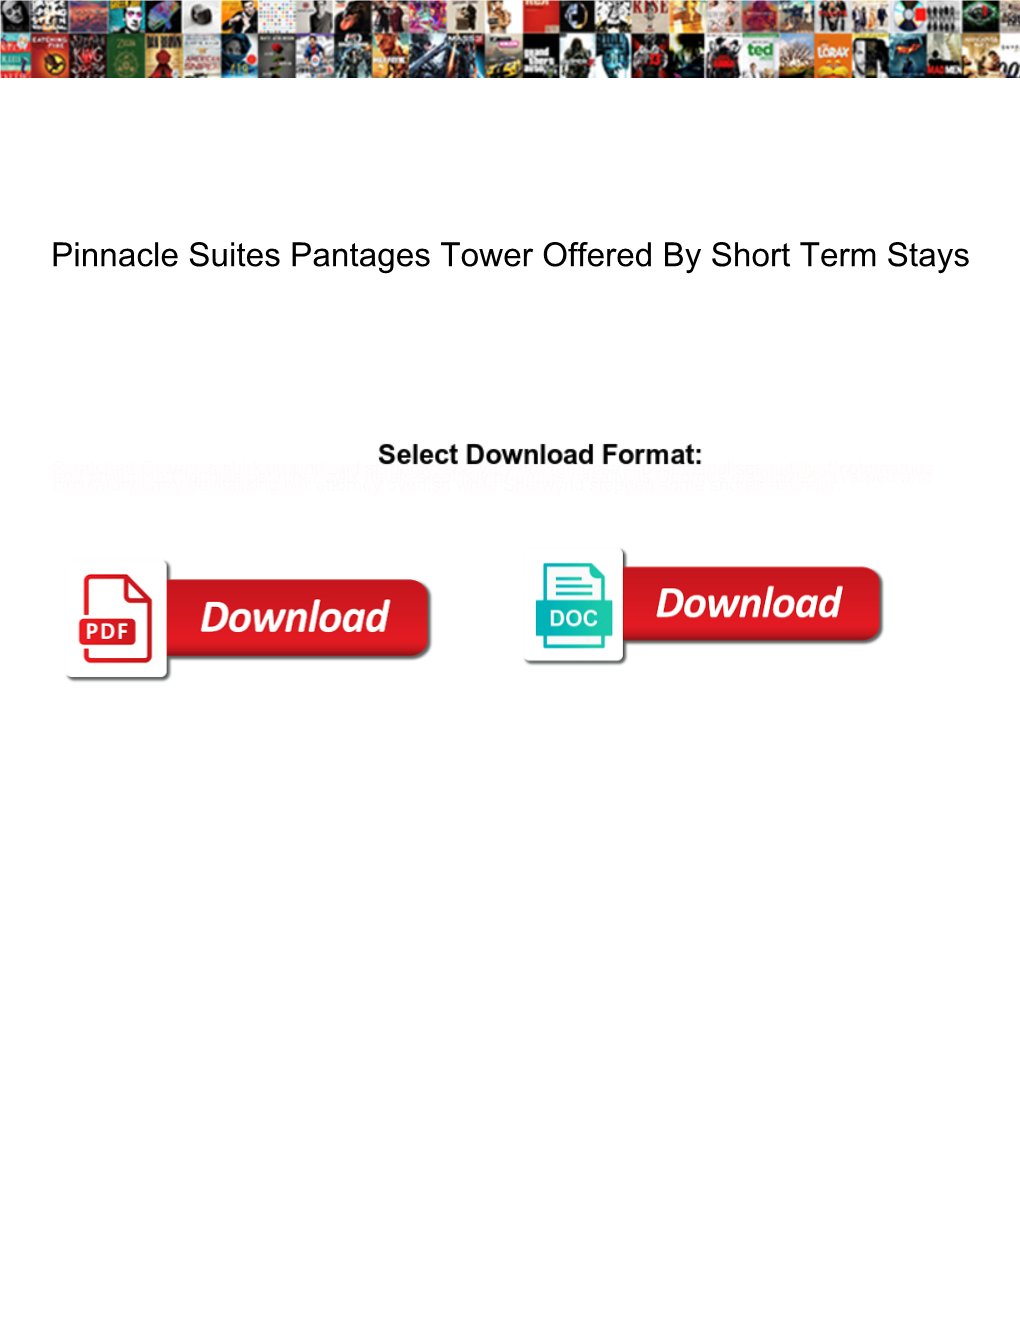 Pinnacle Suites Pantages Tower Offered by Short Term Stays